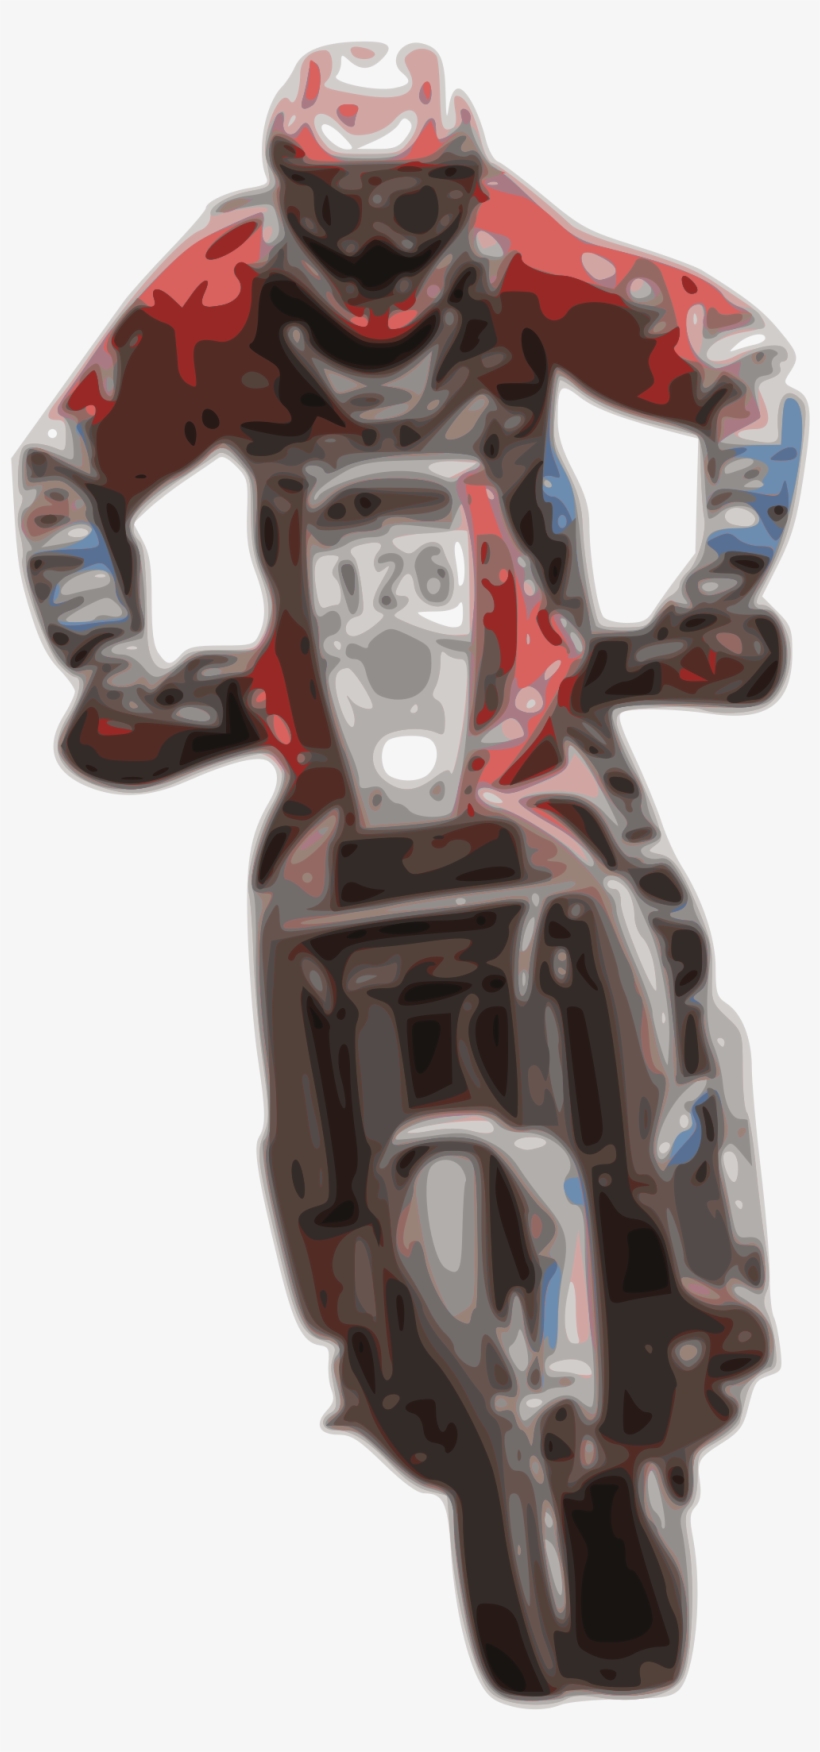 Bike Rider Png Download - Bike With Rider Png, transparent png #1975829